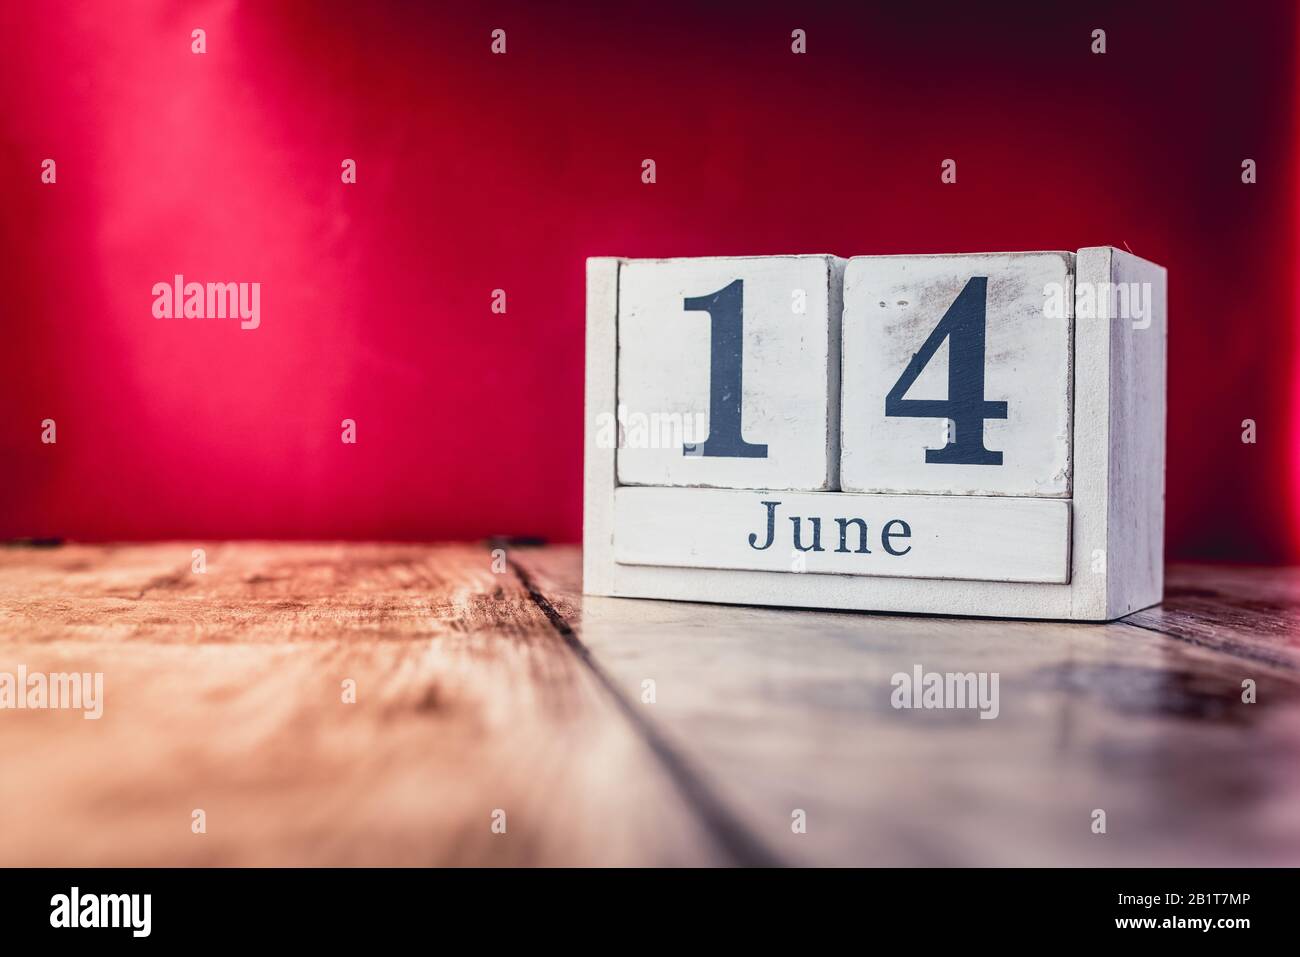 June 14th. Day 14 of month, calendar on business office table, workplace with vivid maroon red background. Summer time Stock Photo